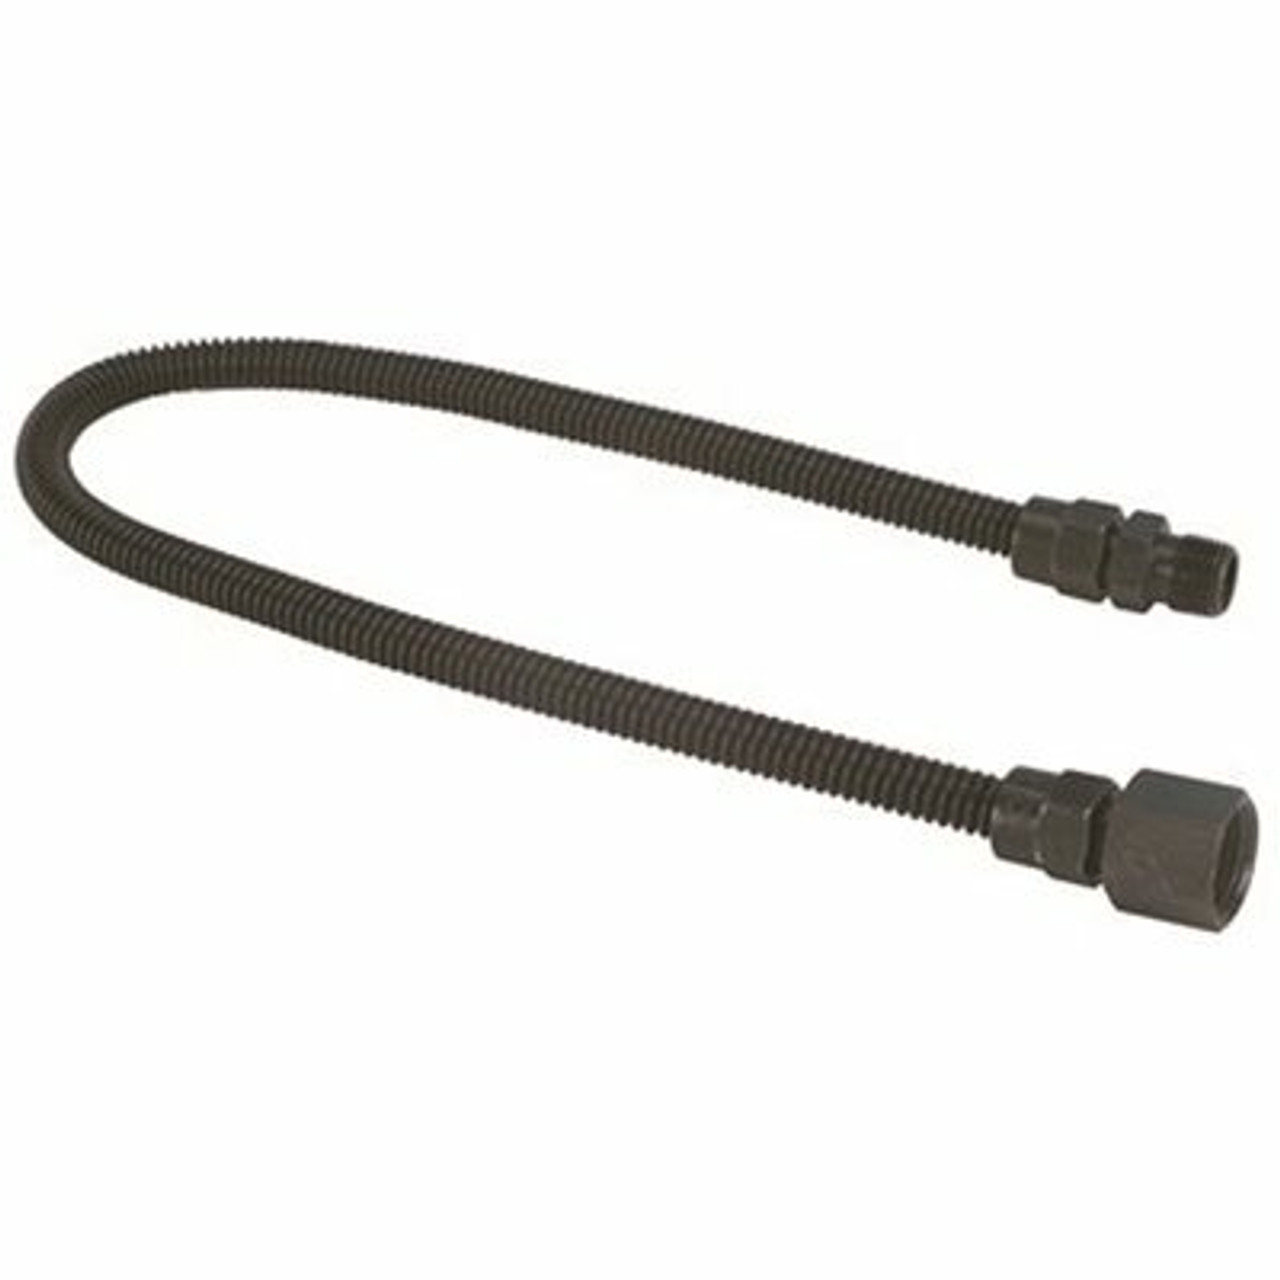 Watts Stainless Steel Gas Hearth Connector, Black Coated, 3/8 In. Od, 1/4 In. Id, 3/8 In. Mnpt X 1/2 In. Fnpt, 24 In. Long